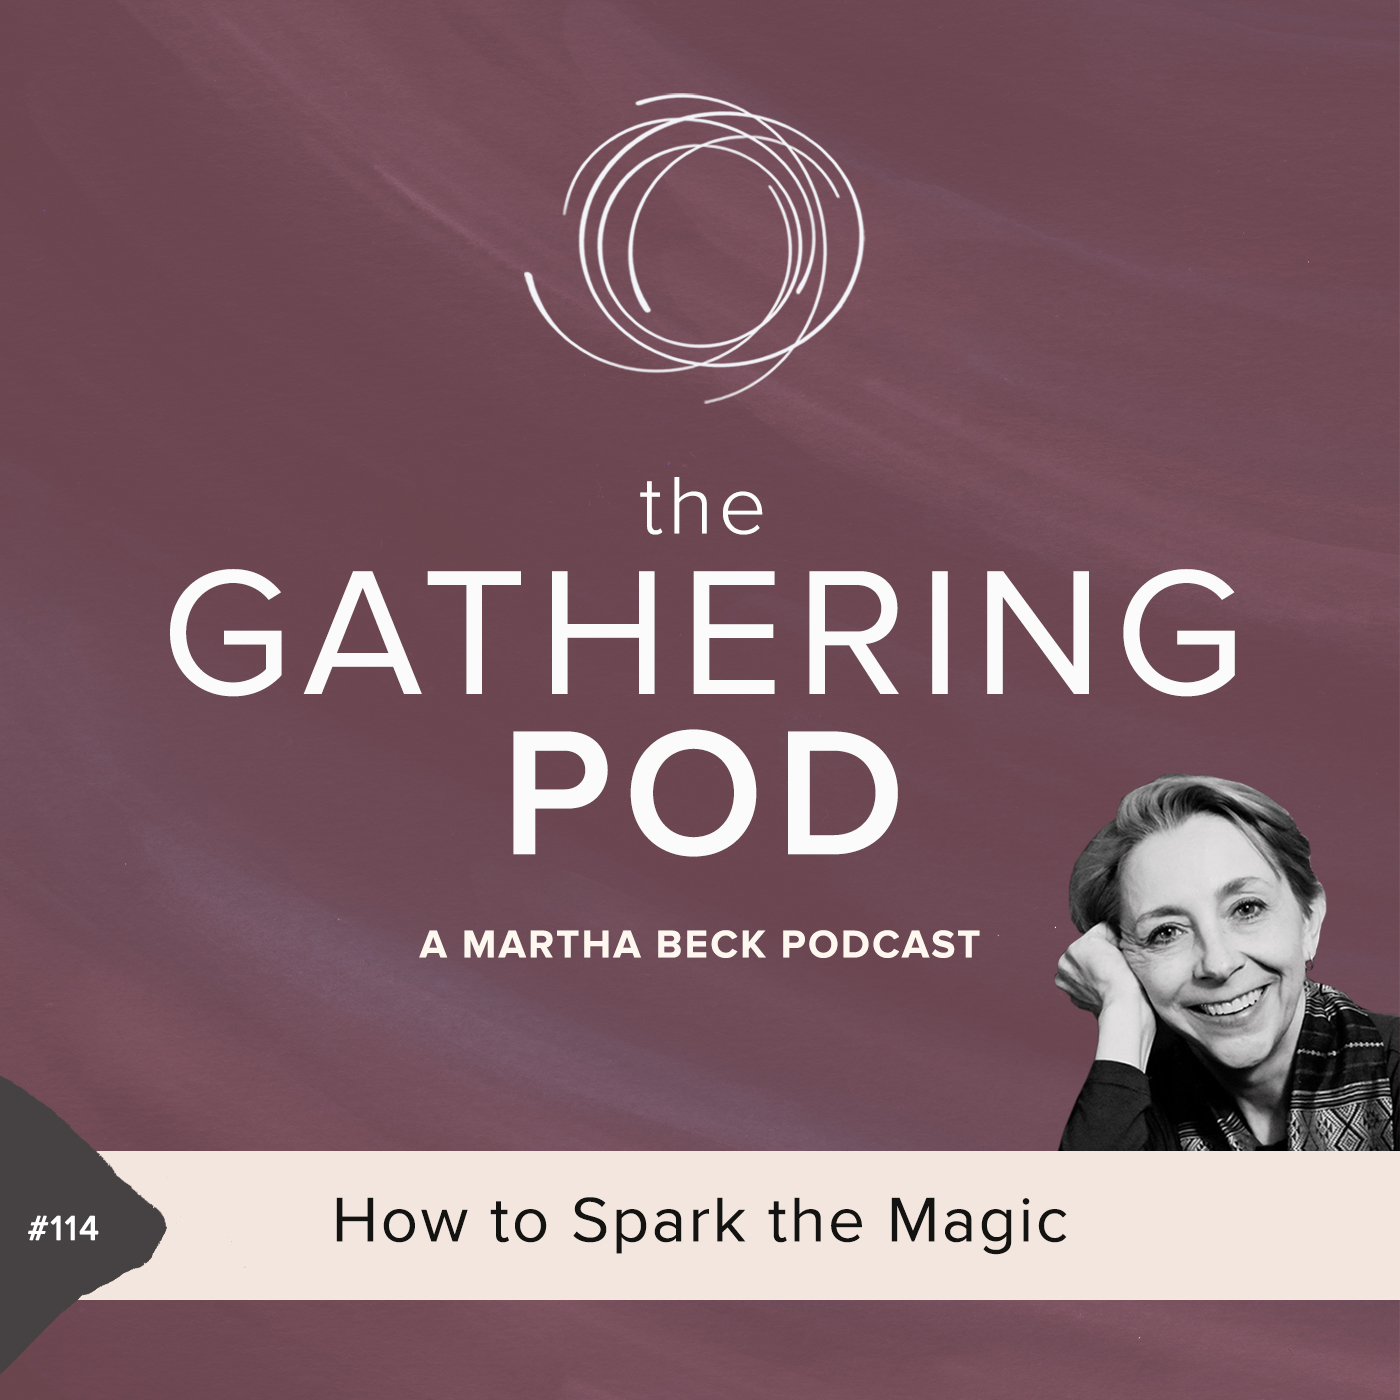 Image for The Gathering Pod A Martha Beck Podcast Episode #114 How to Spark the Magic